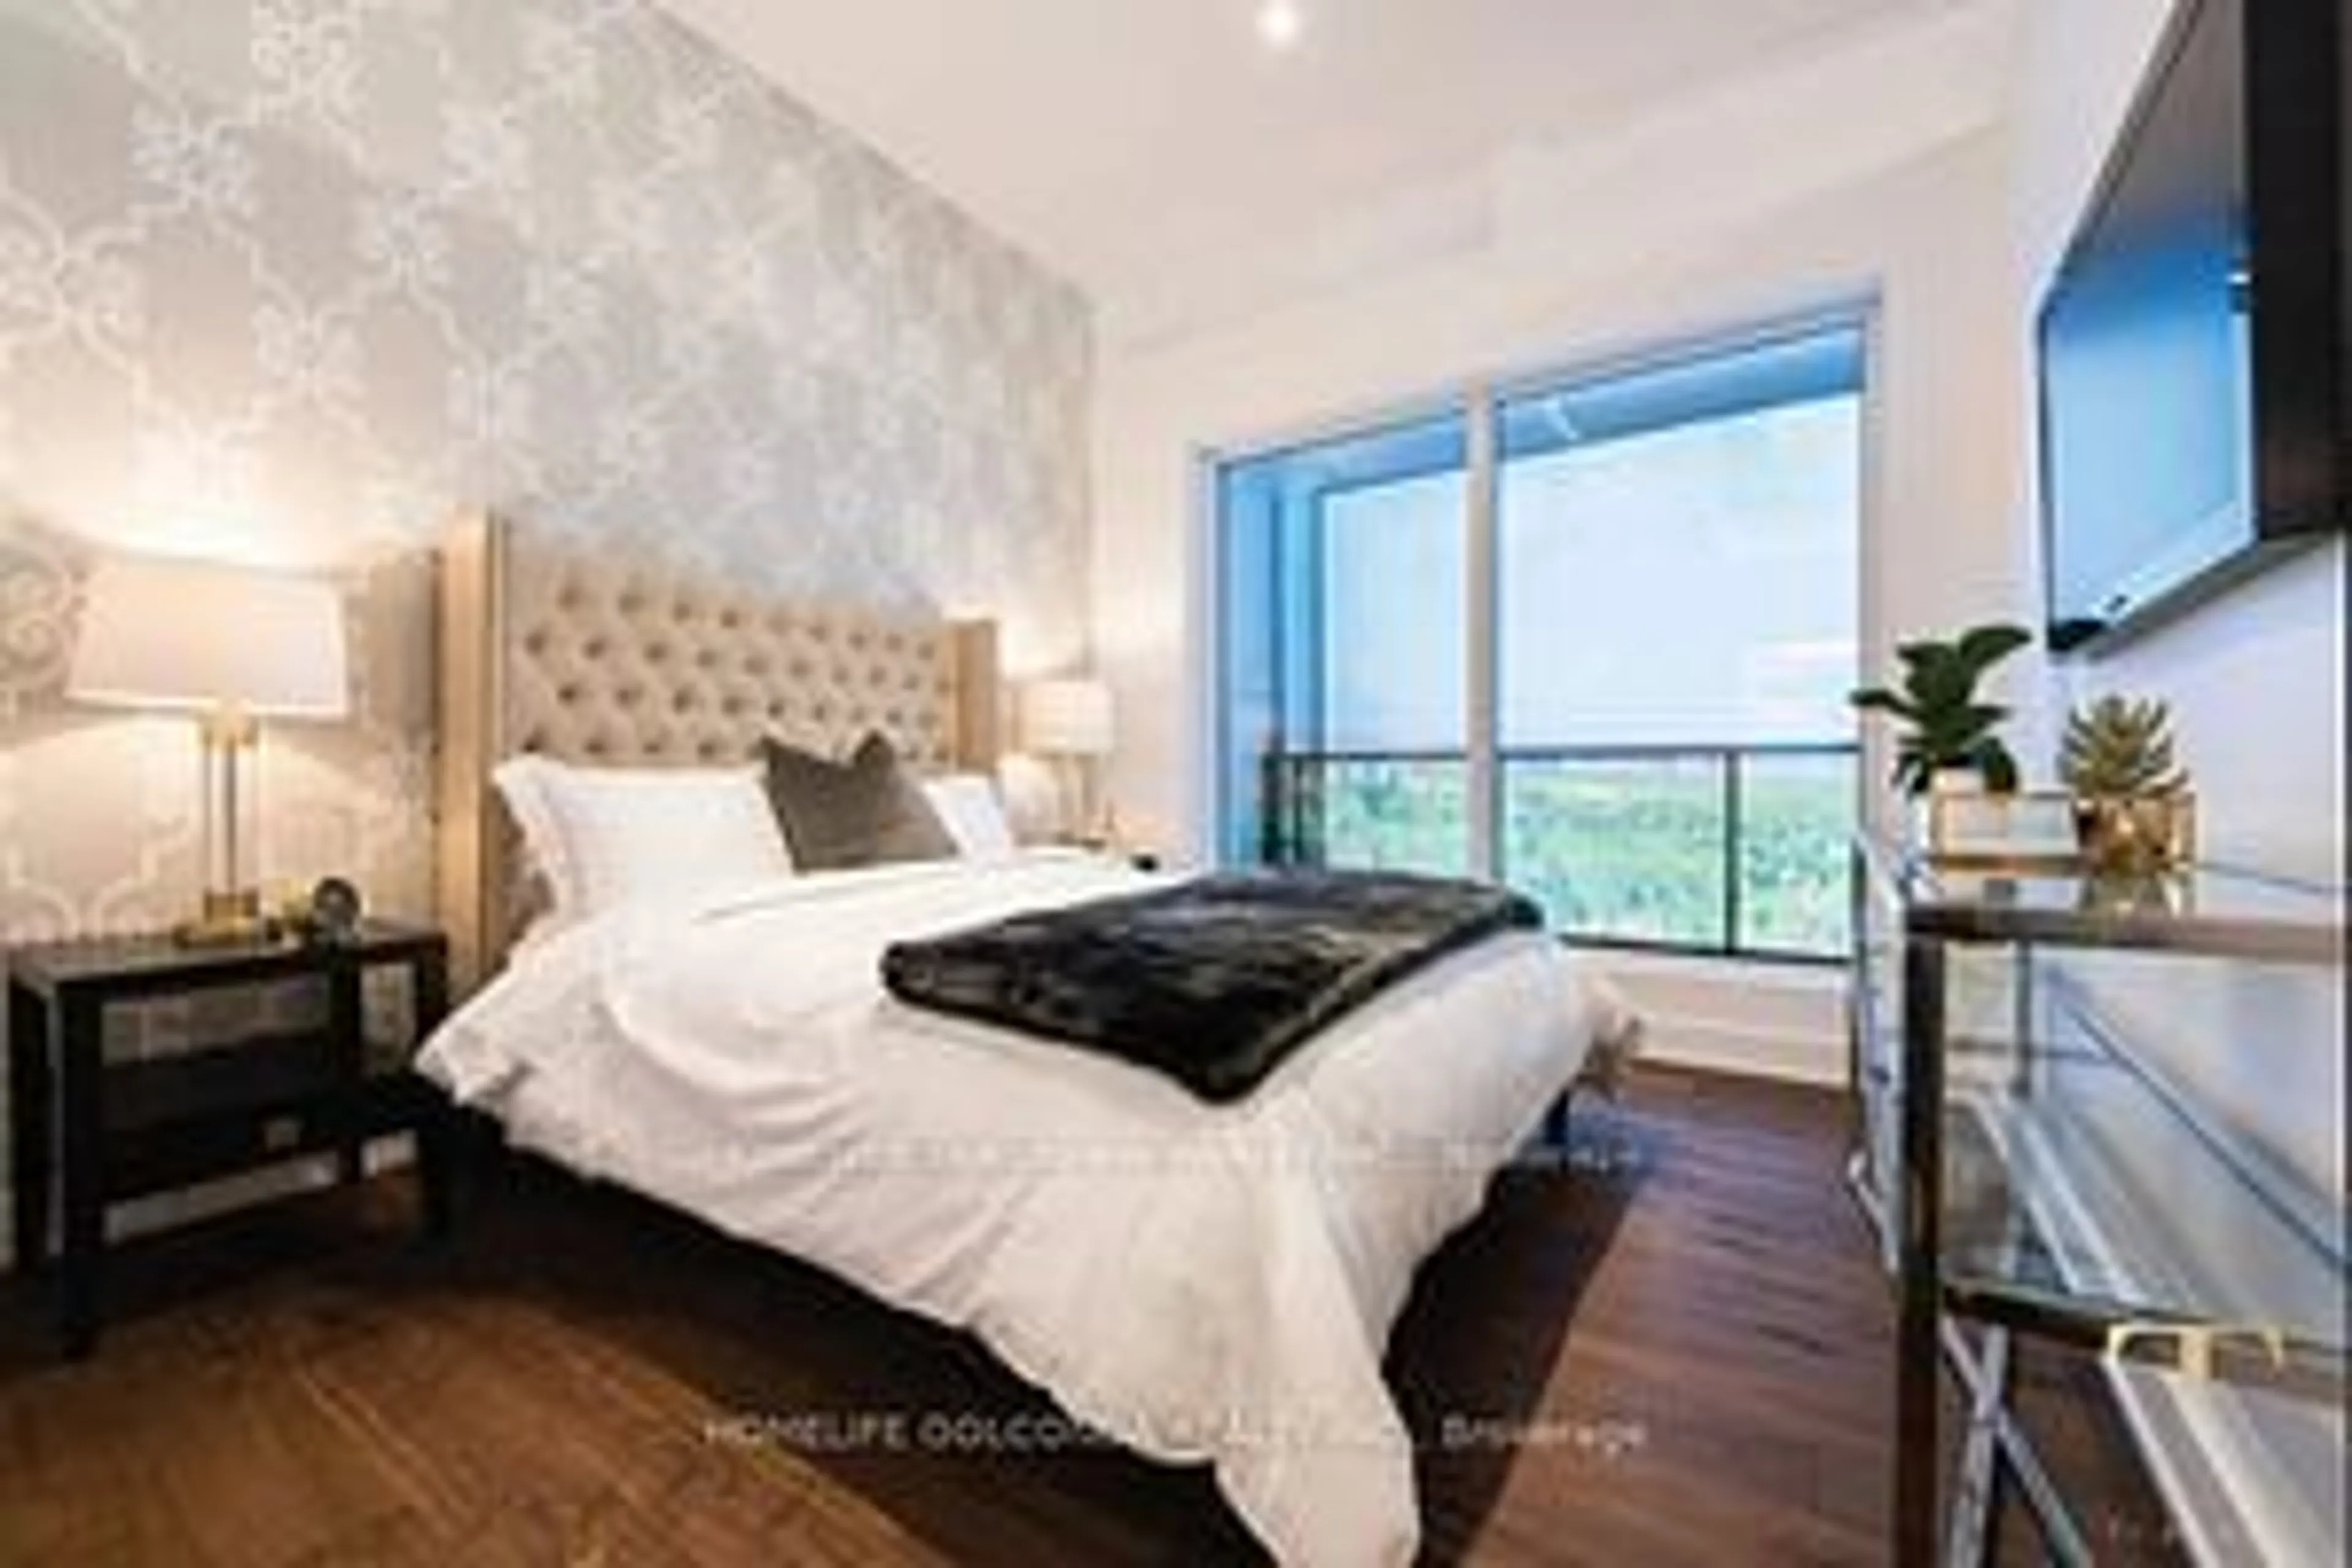 Bedroom for 7 Olympic Gdn Dr #N543, Toronto Ontario M2M 2A9